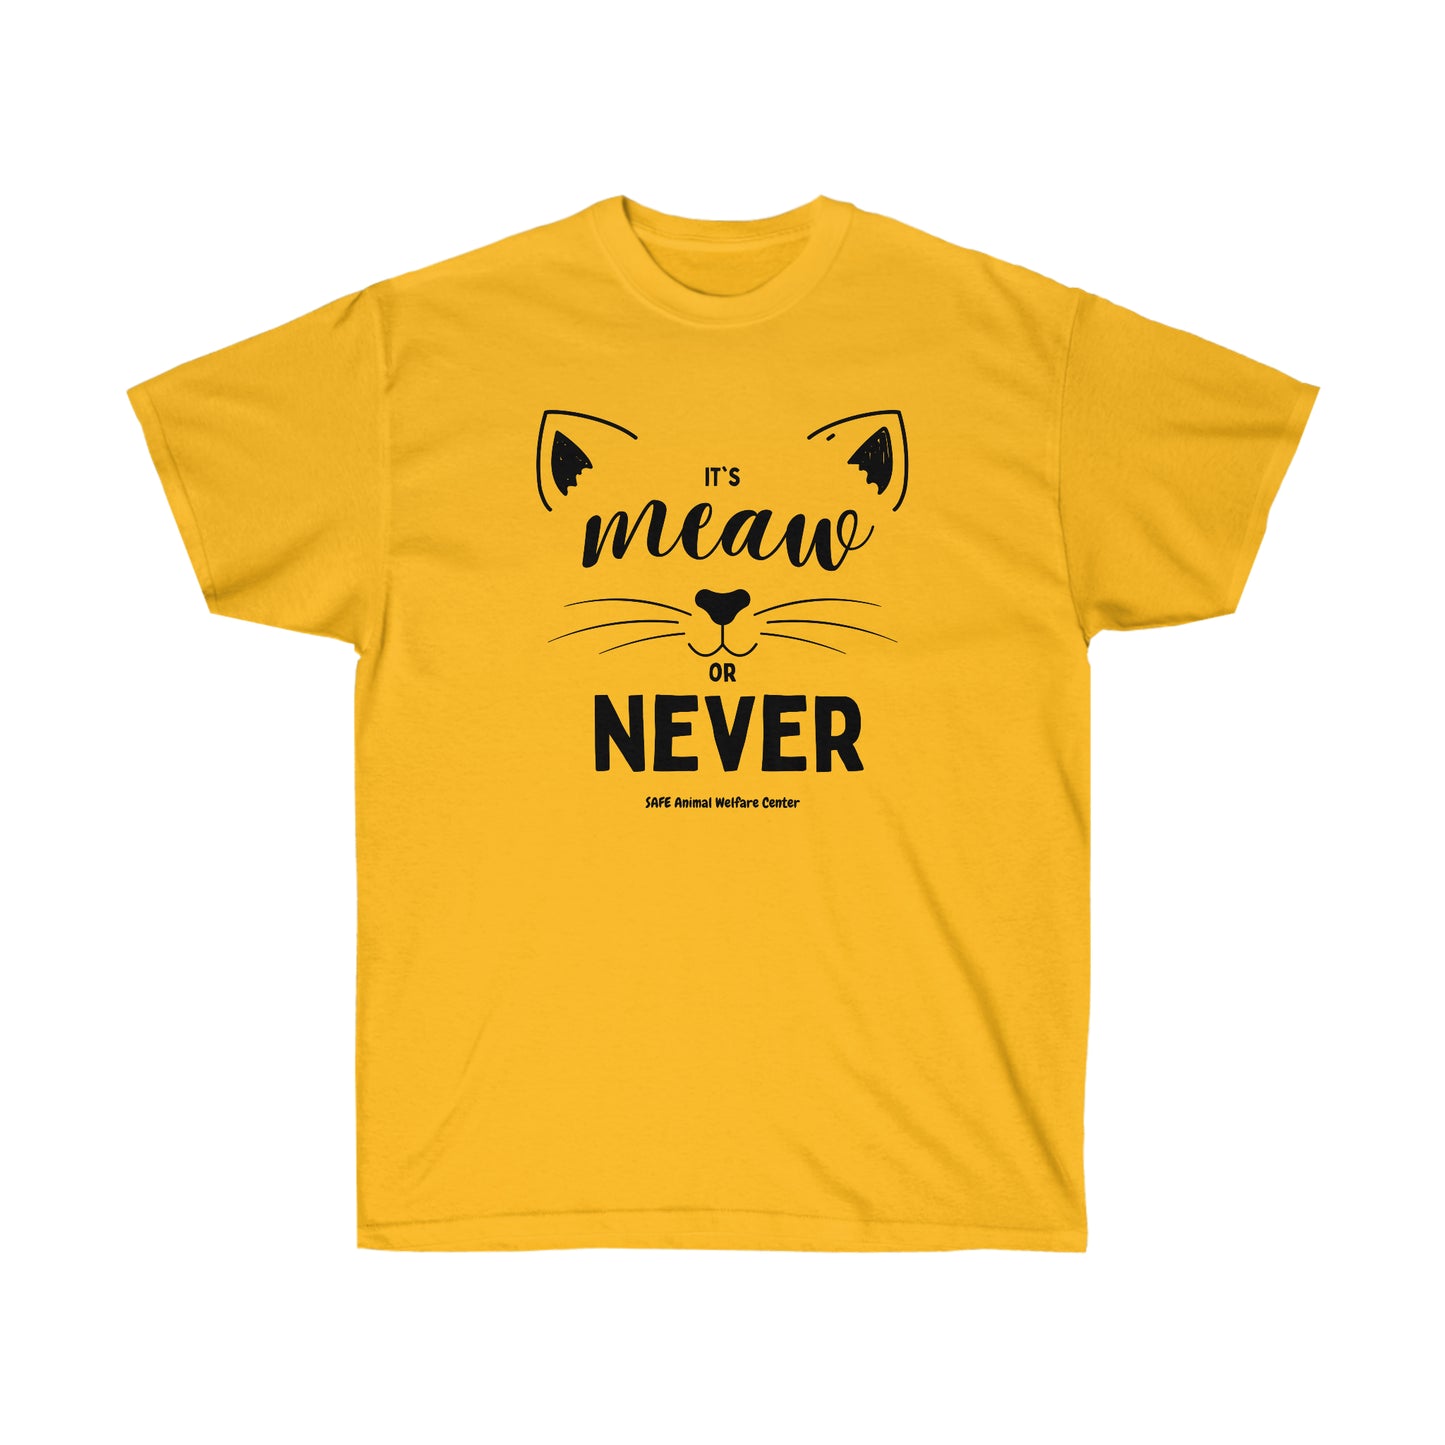 It's meow or never Unisex Ultra Cotton Tee